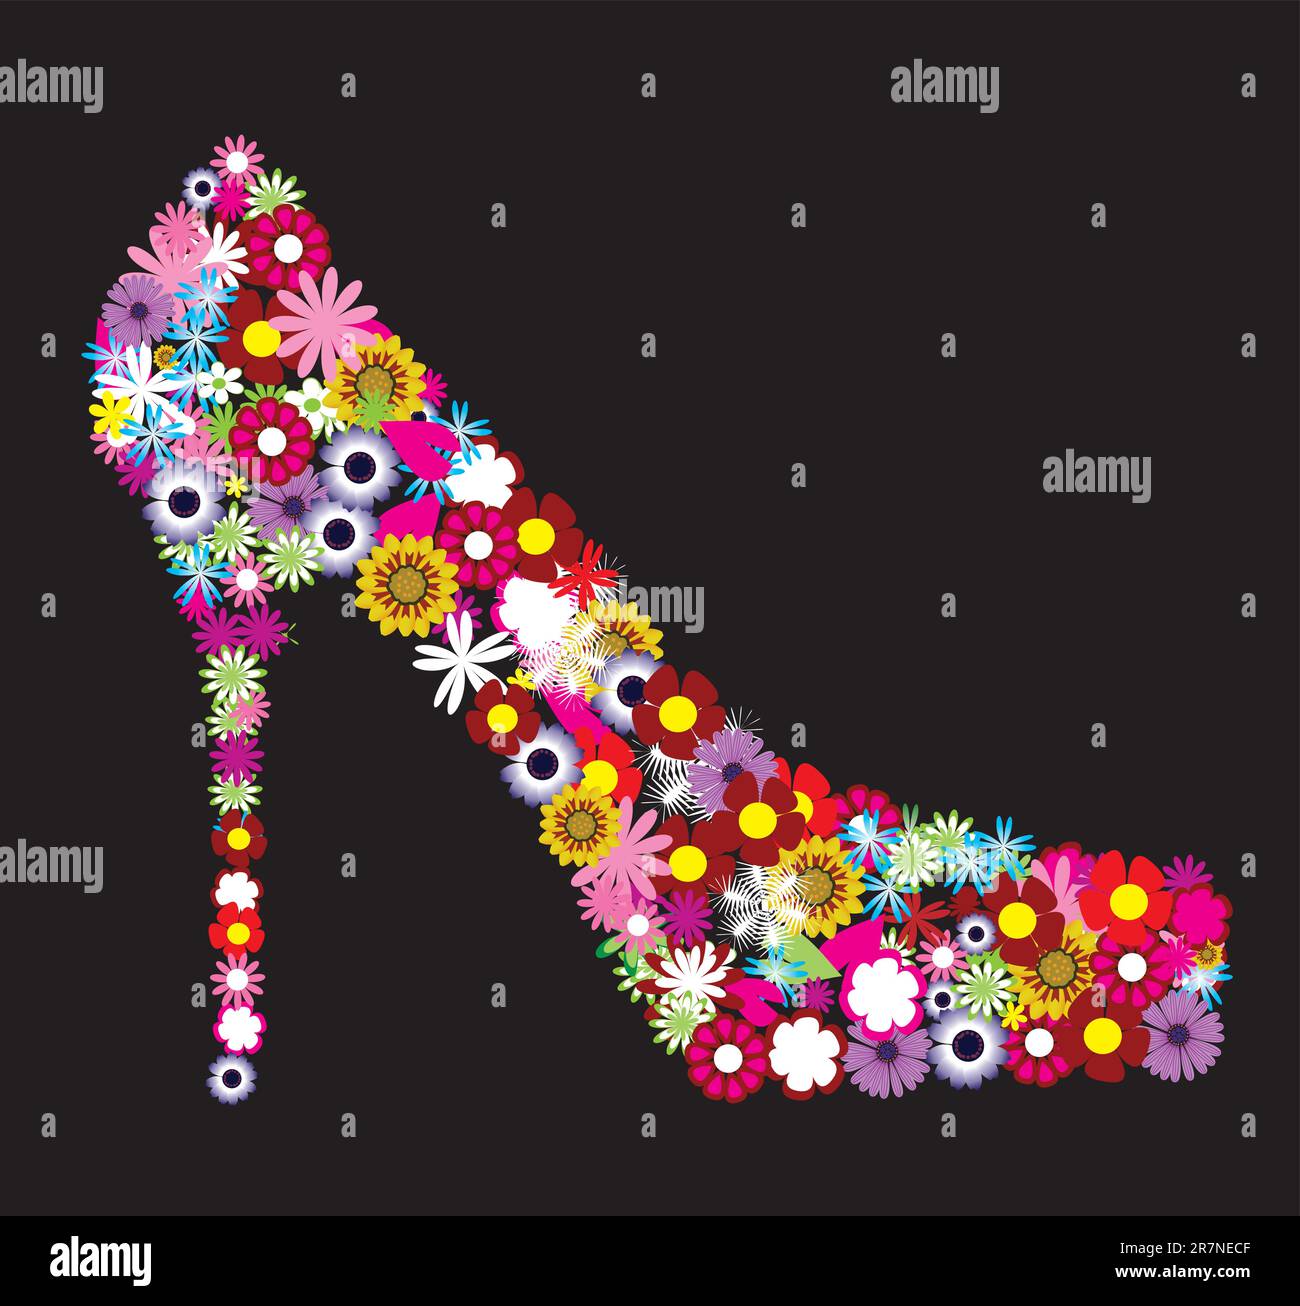 vector illustration of floral female shoe Stock Vector